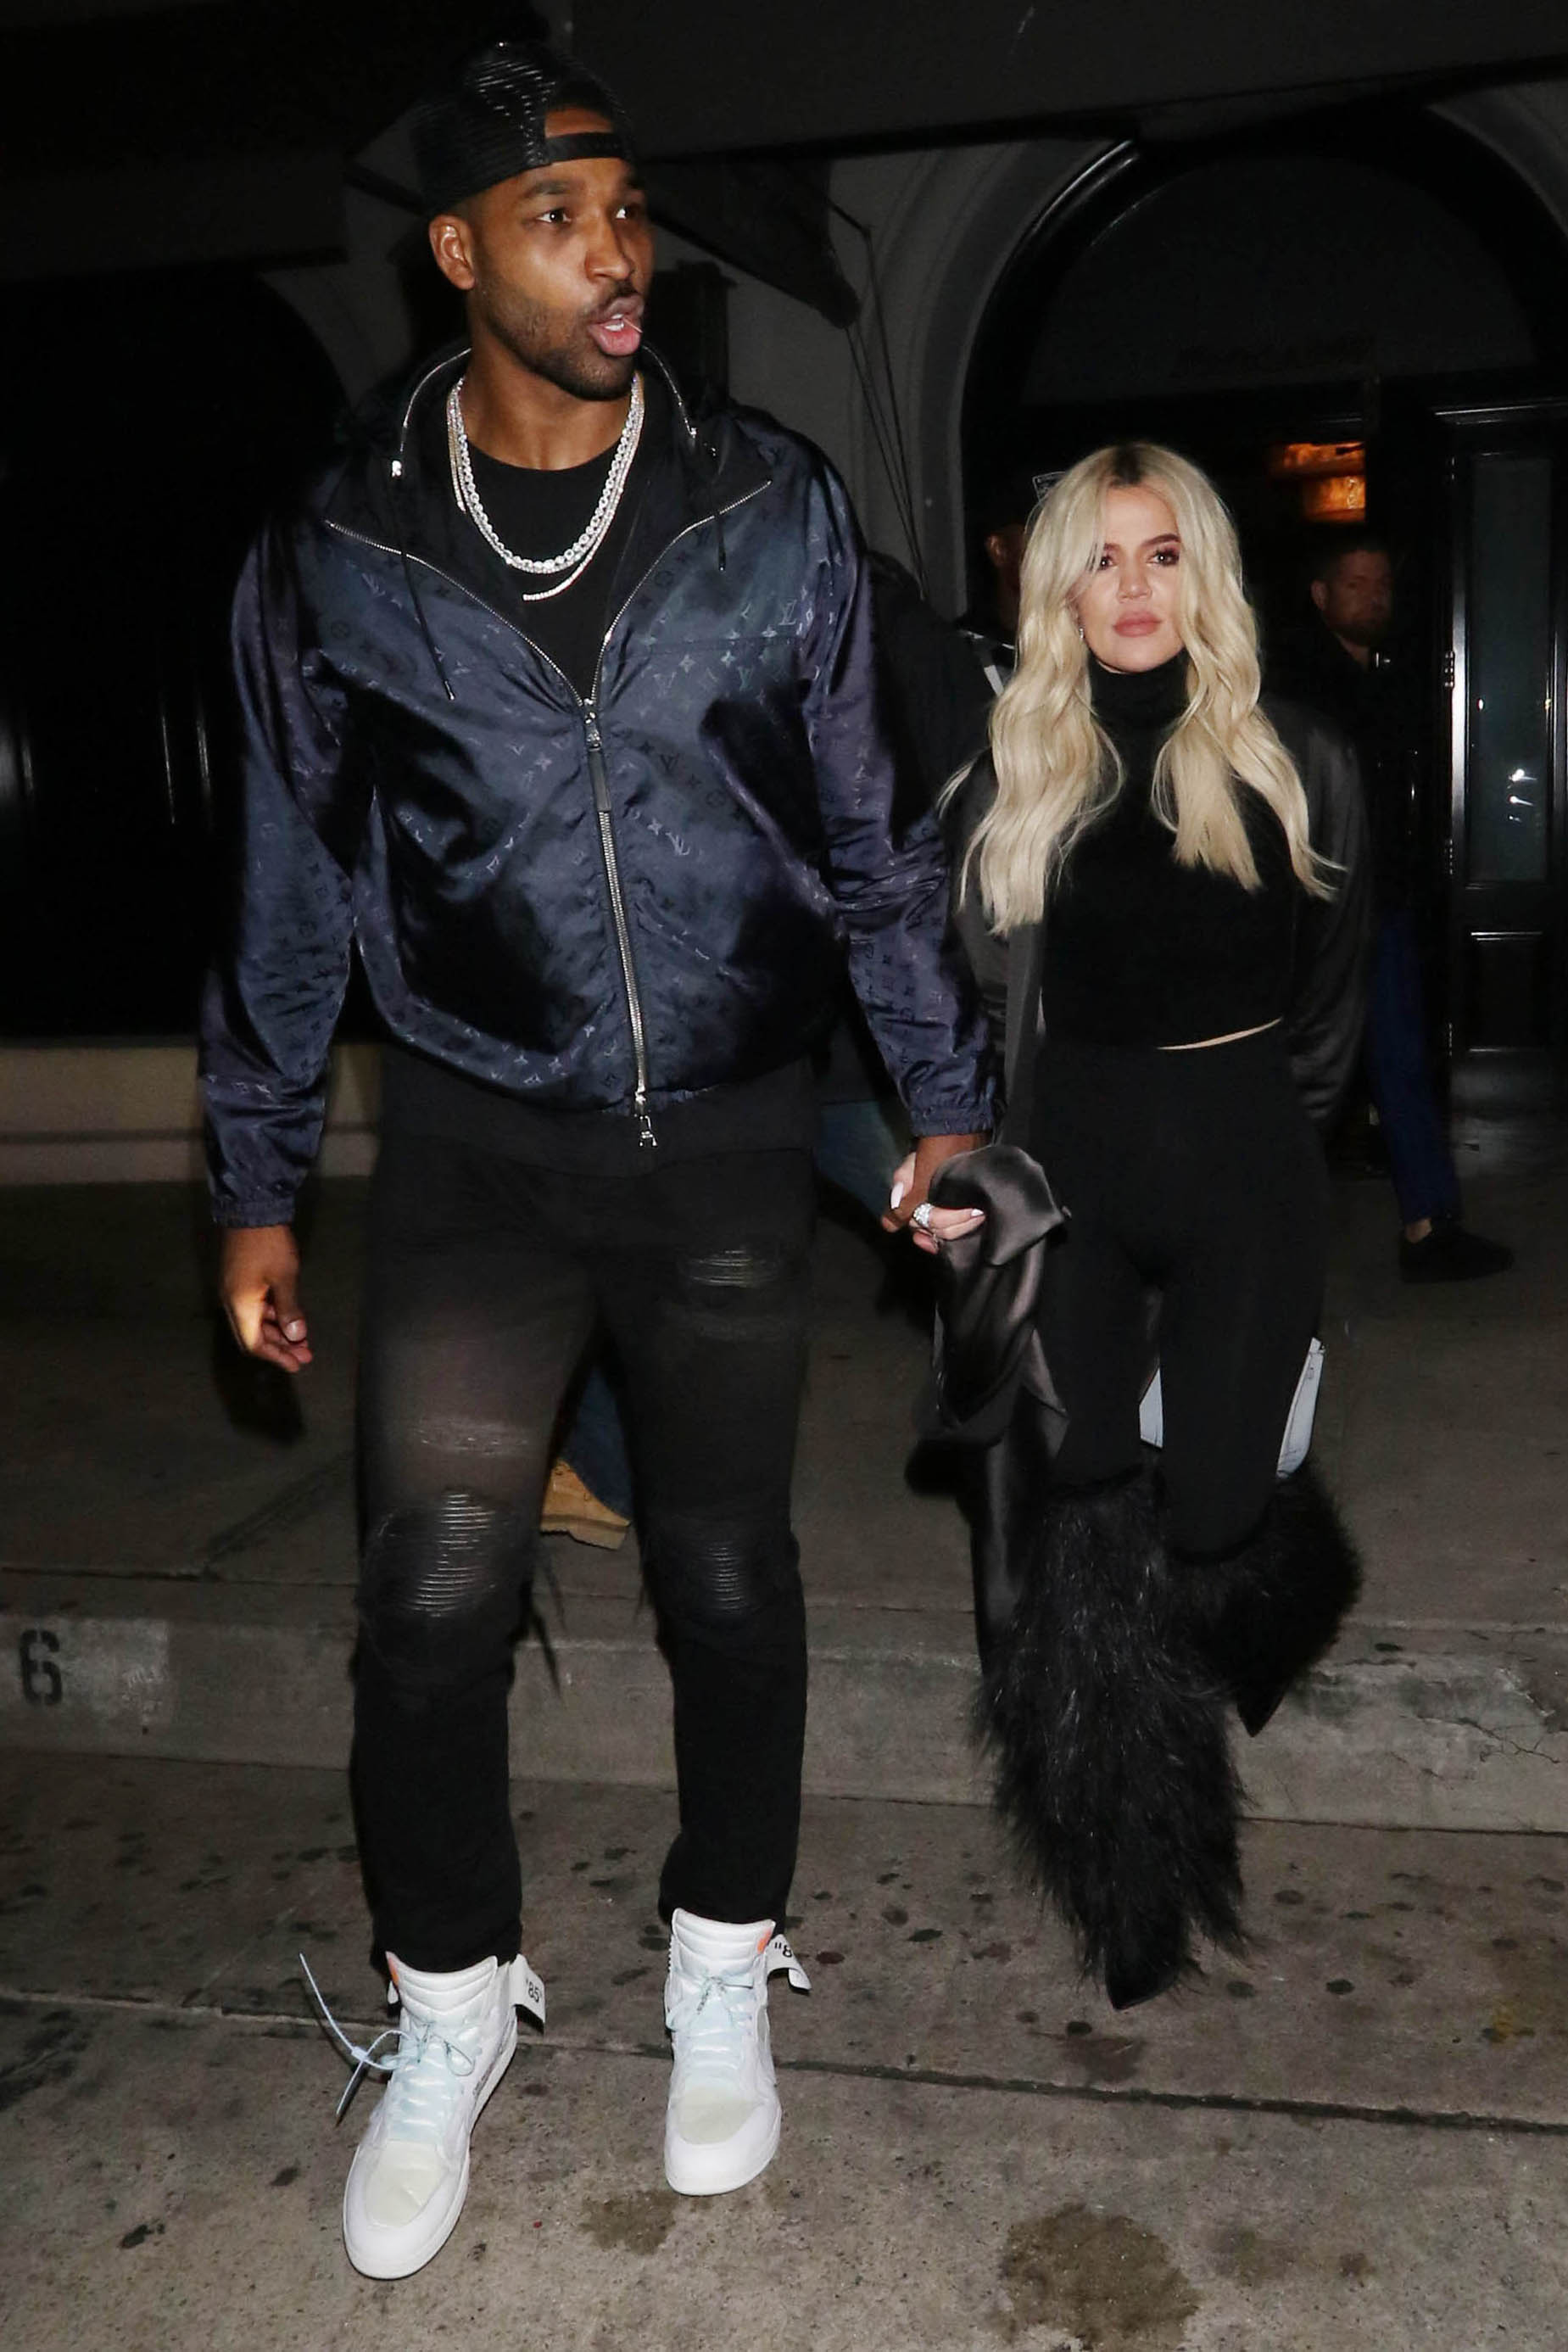 Tristan has been accused of cheating on Khloe many times in the past